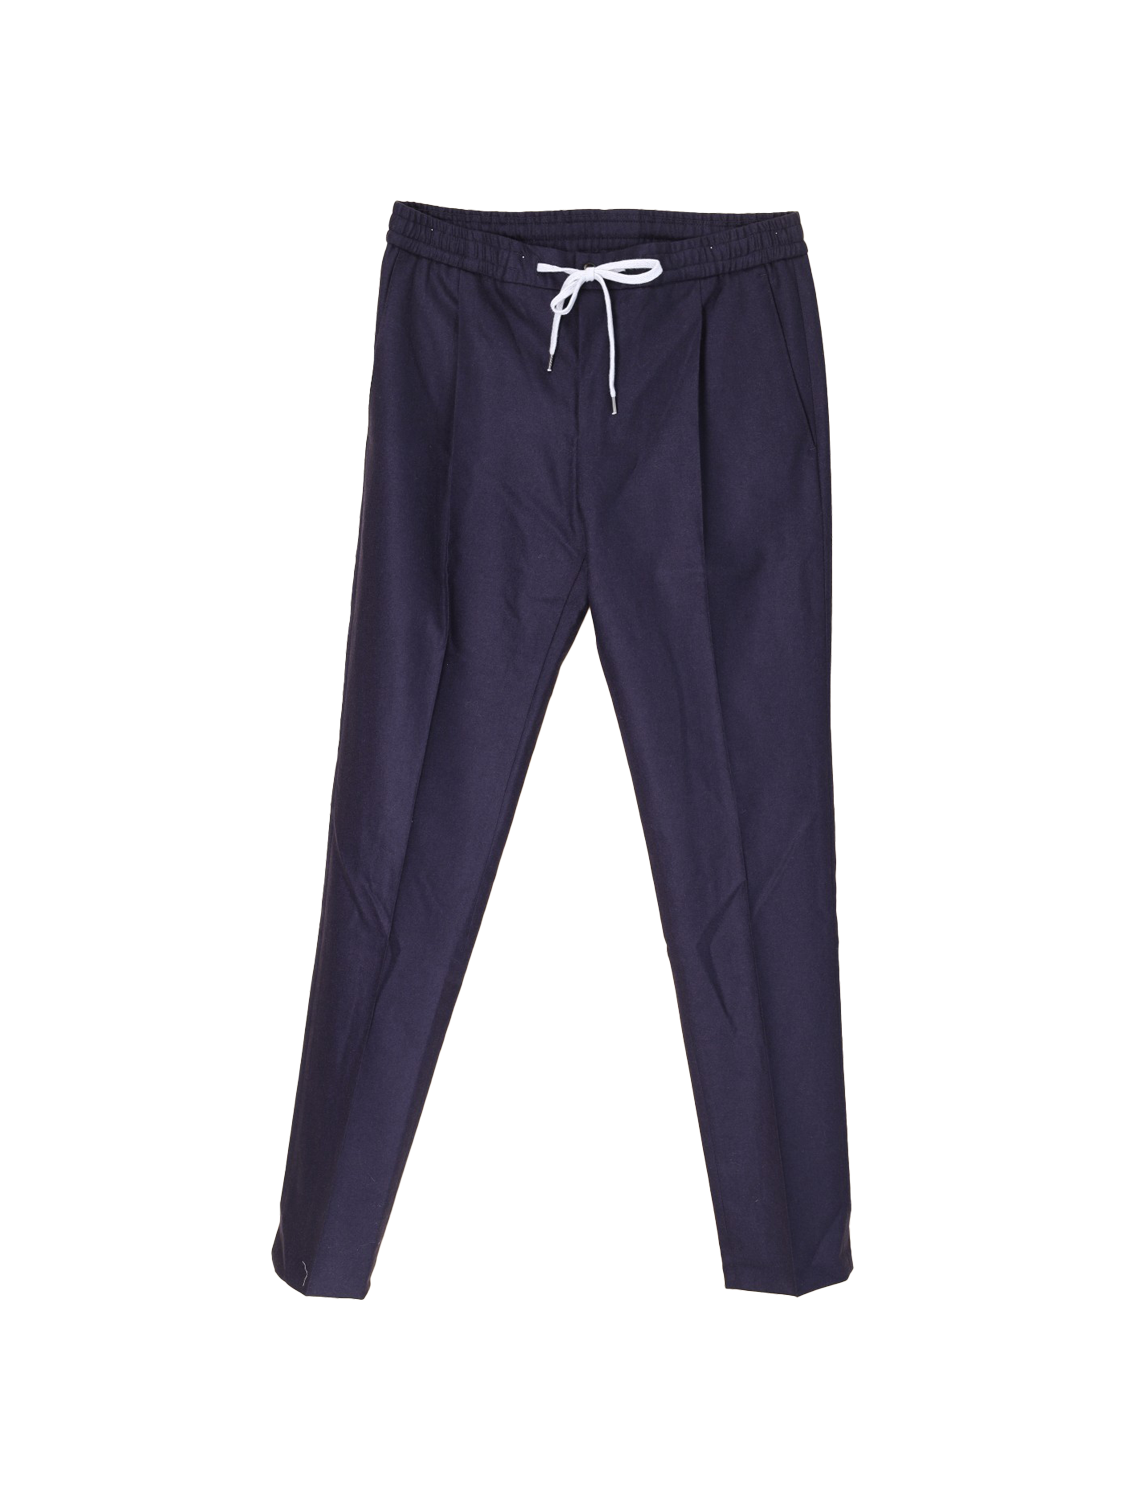 Soft fit trousers made from a virgin wool-cashmere mix 